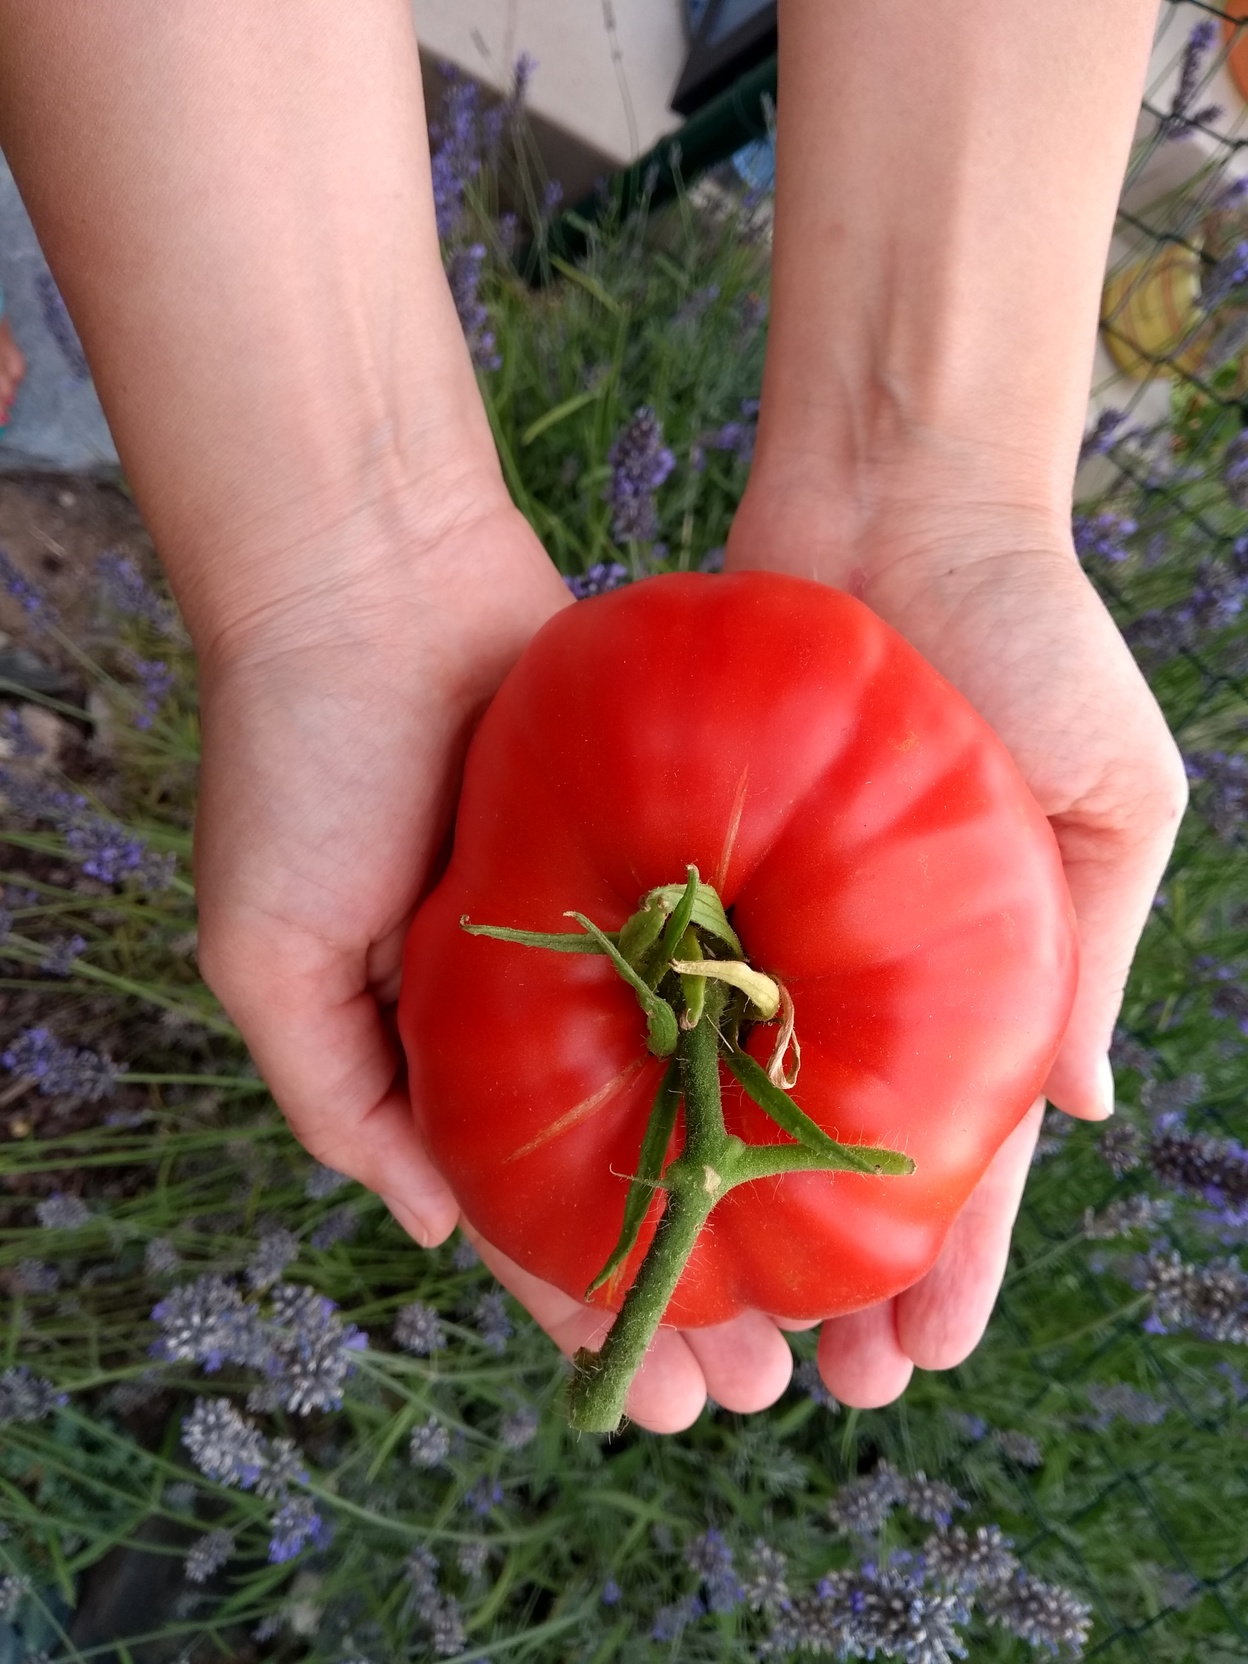 You need both hands of an adult woman to hold the tomato